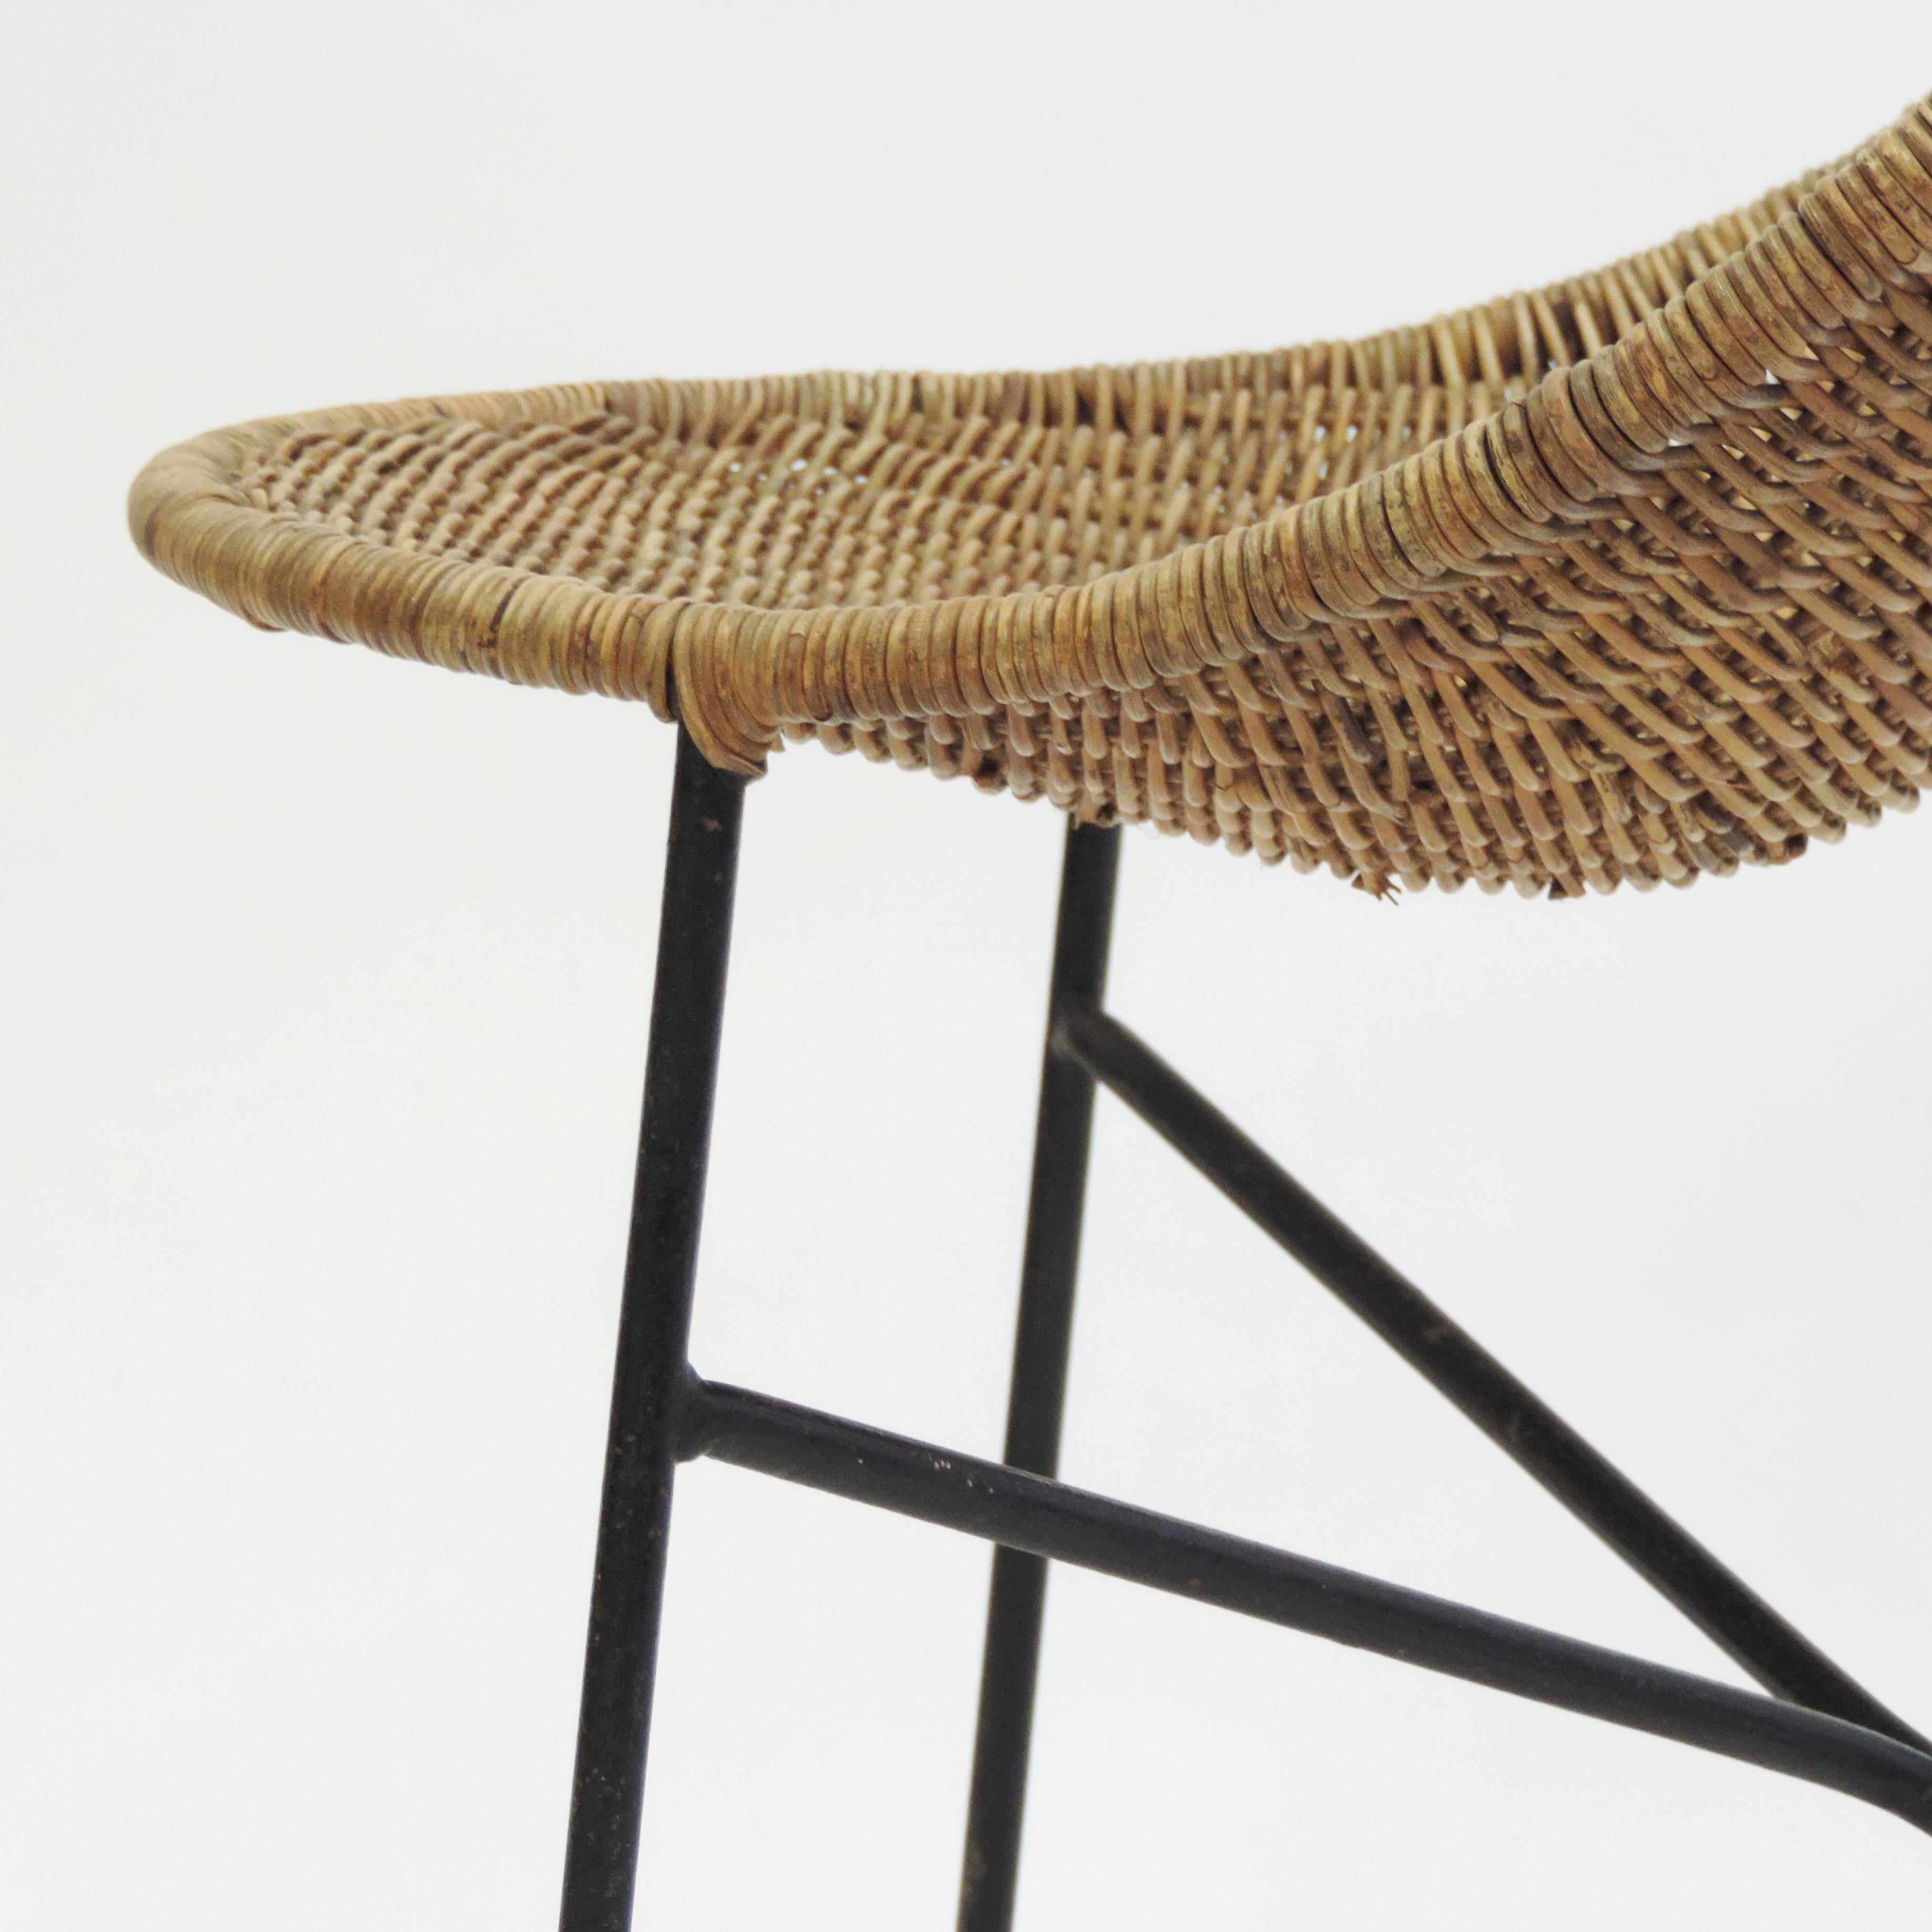 Mid-20th Century French duo Georges and Hermine Laurent Wicker and Metal Chair, 1950s For Sale